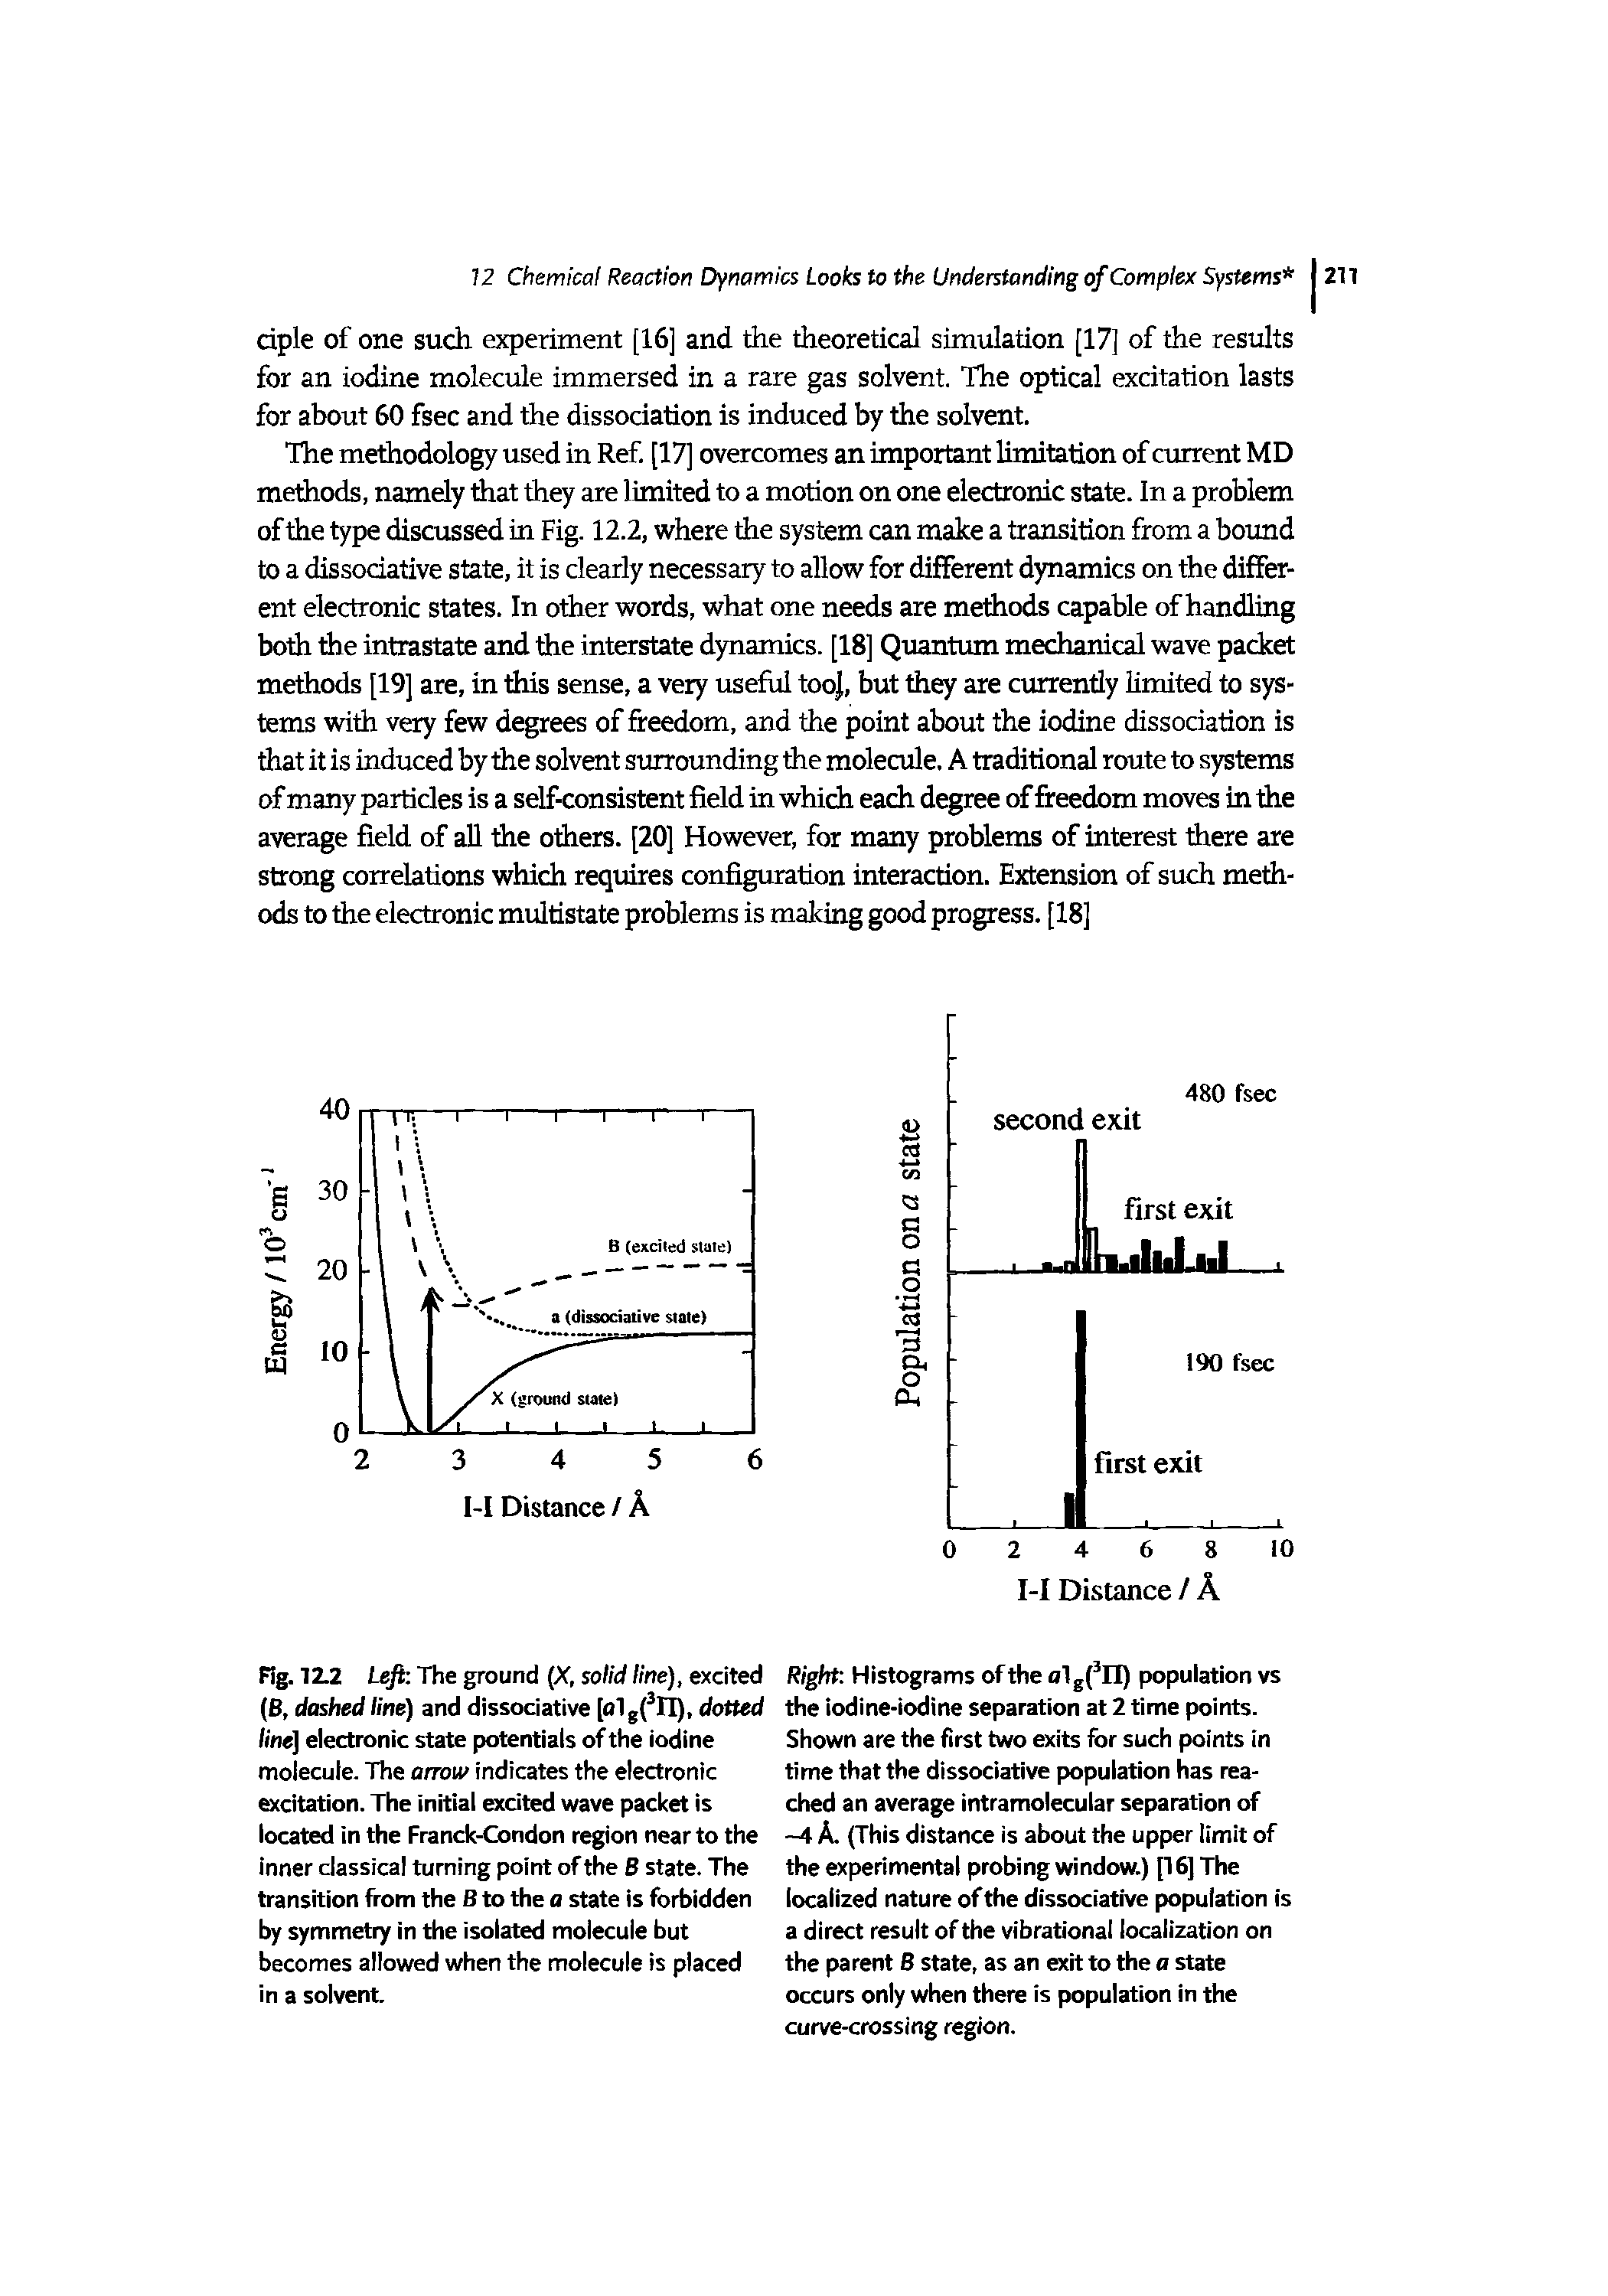 Fig. 12.2 Left The ground (X, solid line), excited (6, dashed line) and dissociative [a1g(3II), dotted line] electronic state potentials of the iodine molecule. The arrow indicates the electronic excitation. The initial excited wave packet is located in the Franck-Condon region near to the inner classical turning point of the B state. The transition from the B to the a state is forbidden by symmetry in the isolated molecule but becomes allowed when the molecule is placed in a solvent.